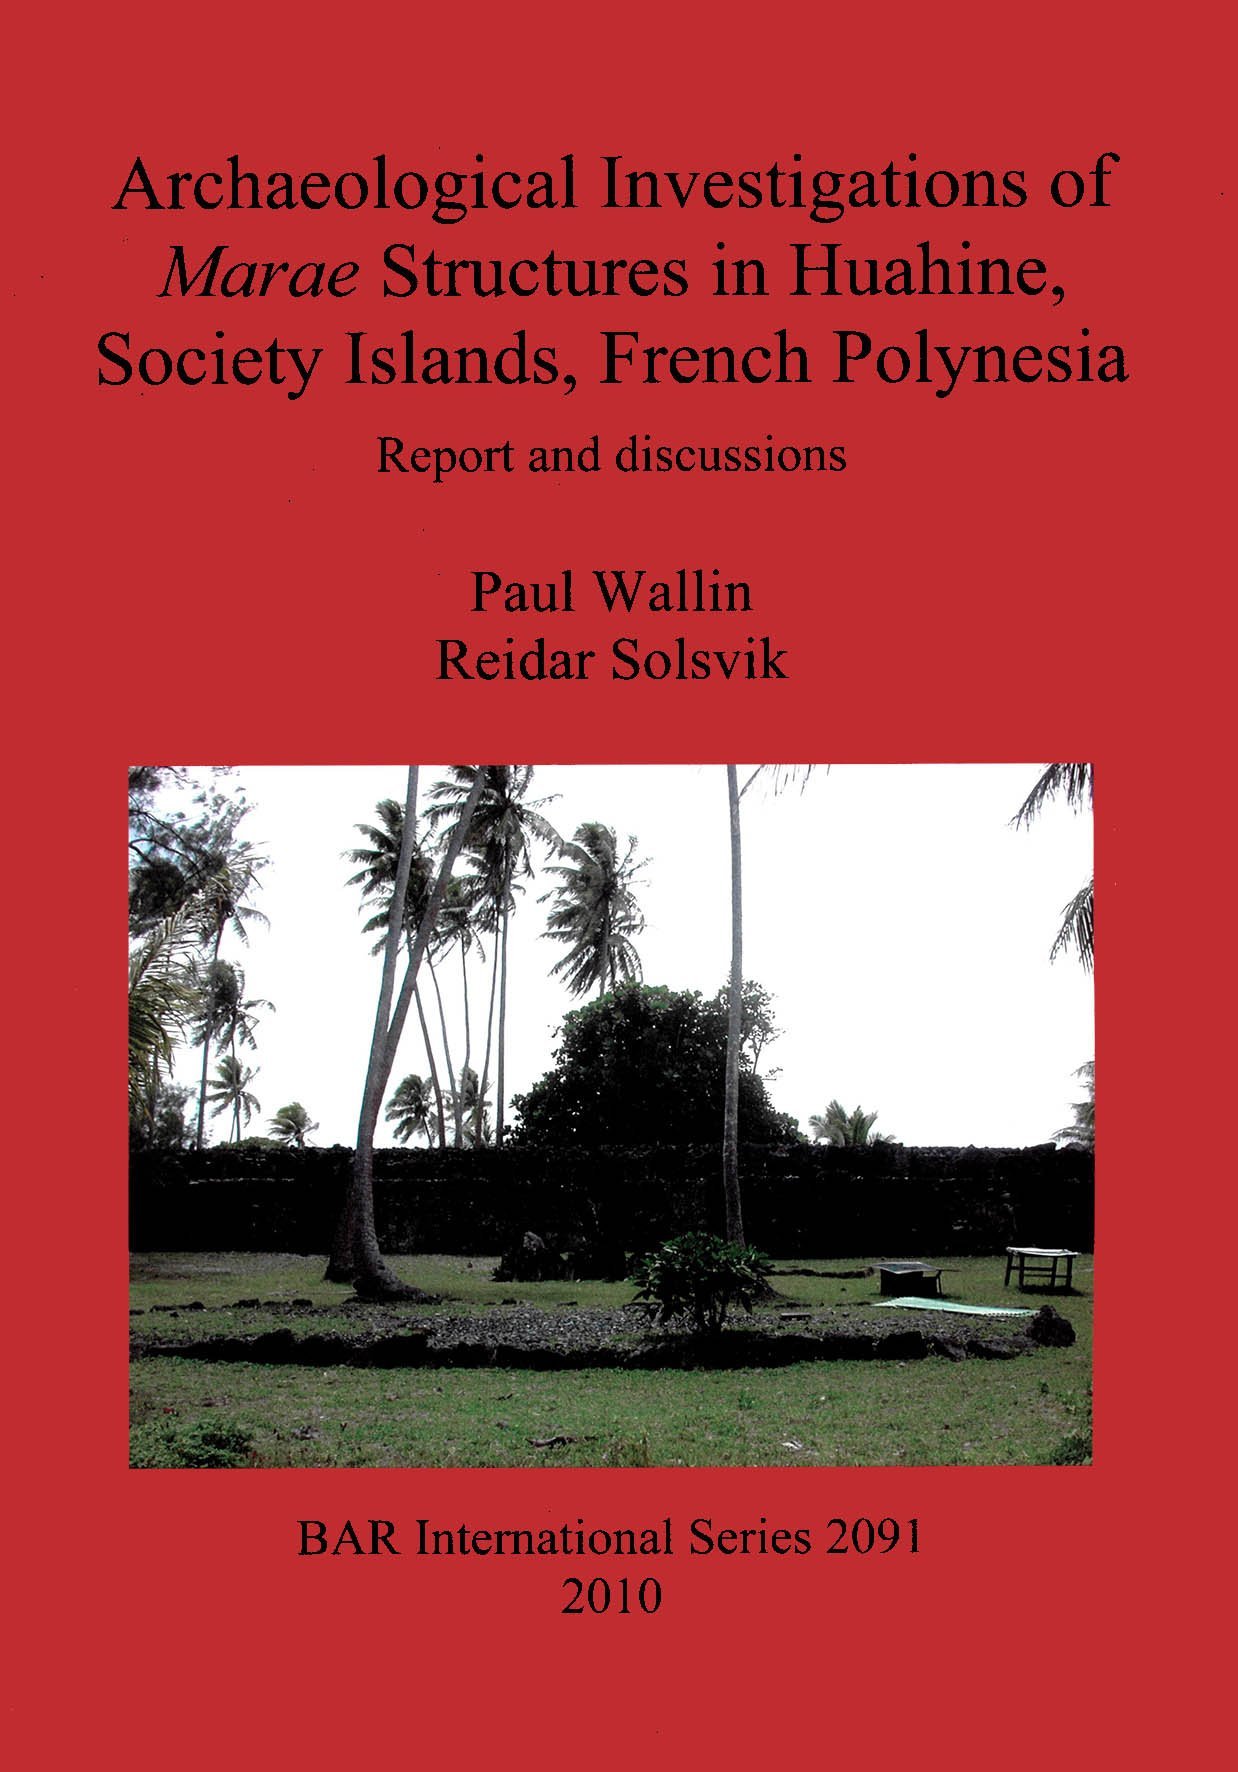 Archaeological Investigations of Marae Structures in Huahine, Society Islands, French Polynesia